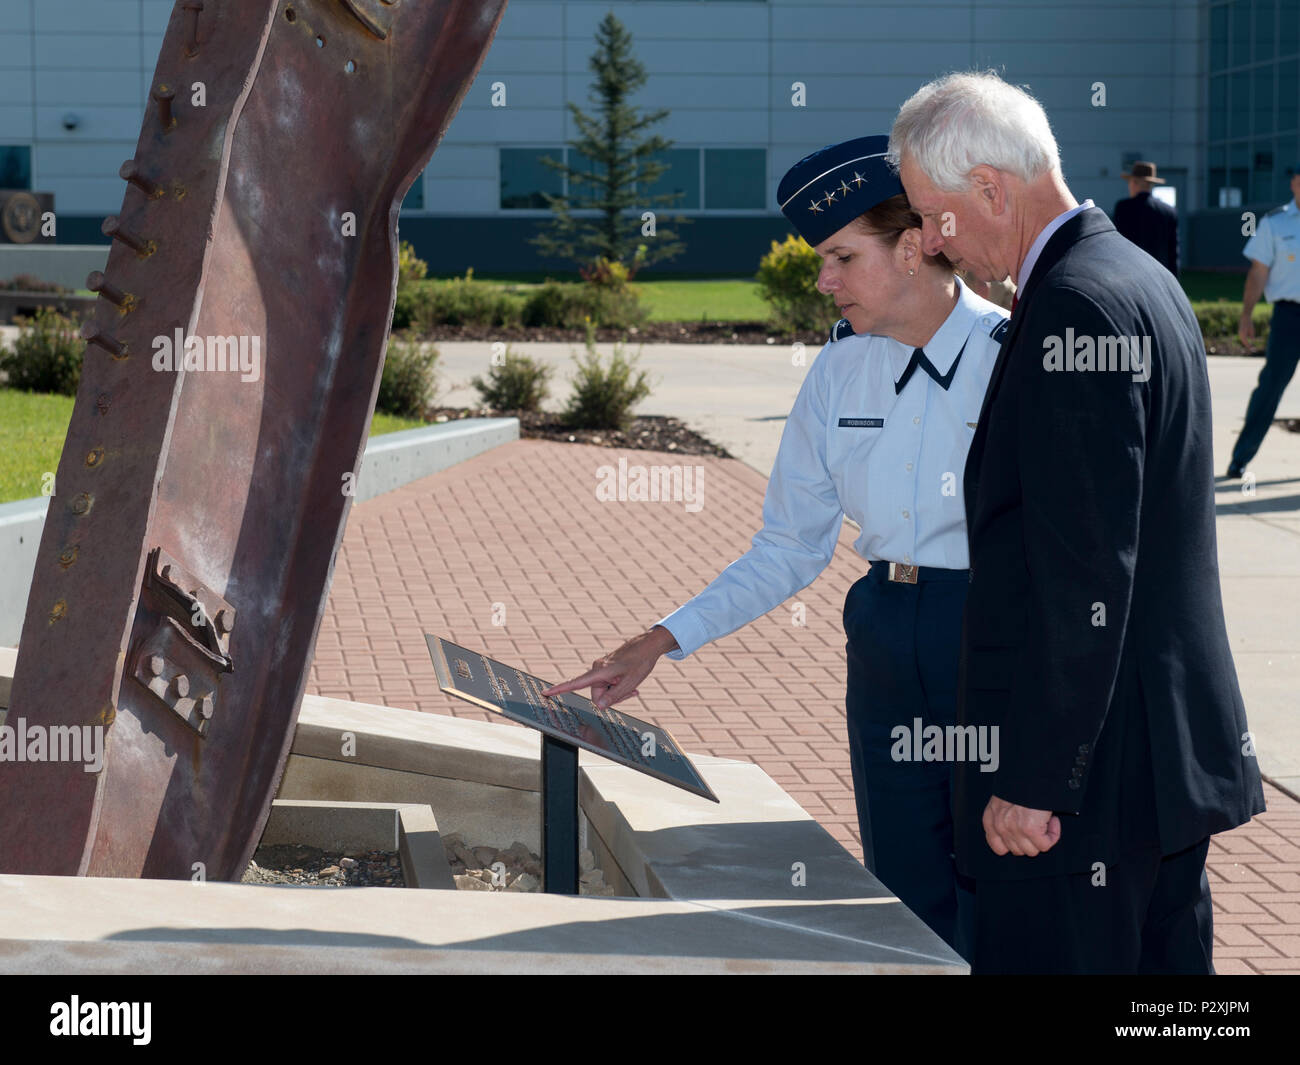 U.S. Air Force Gen. Lori Robinson, Commander of North American Aerospace Defense Command and United States Northern Command, introduces the Honourable Stephane Dion, Canadian Minister of Foreign Affairs, to the NORAD and USNORTHCOM 9/11 Memorial outside the command’s headquarters in Colorado Springs, Colo., Aug 8, 2016. During his visit, Minister Dion was briefed on both NORAD and USNORTHCOM missions and the unique partnership that the U.S. and Canada share. (Photo by: N-NC Public Affairs/Released) Stock Photo